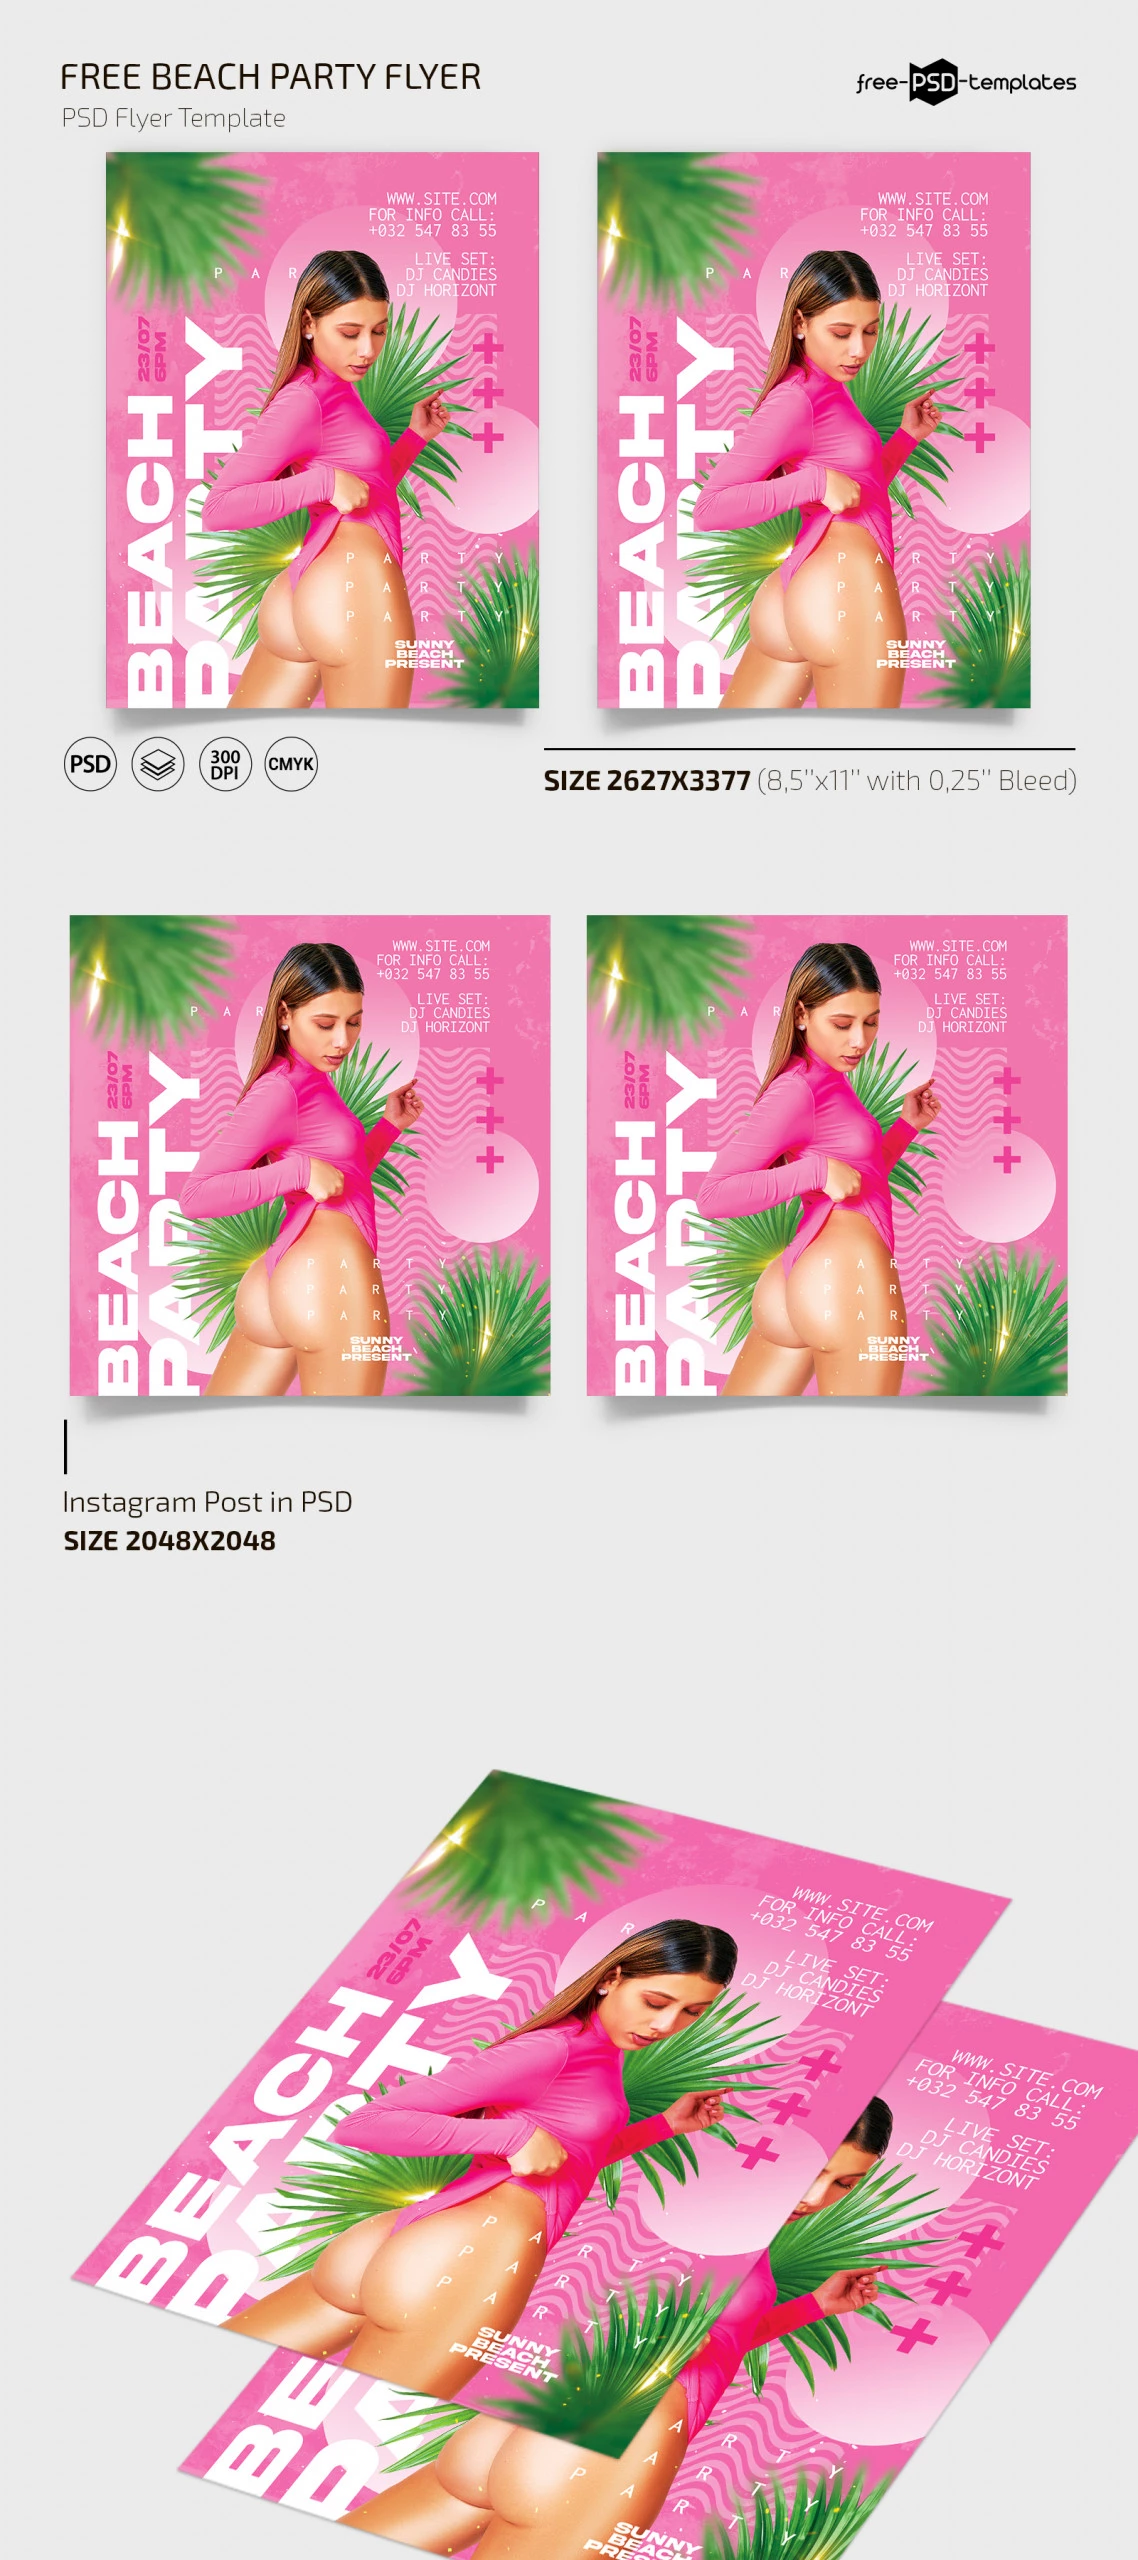 Free Beach Party Flyer Template + Instagram Post (PSD)